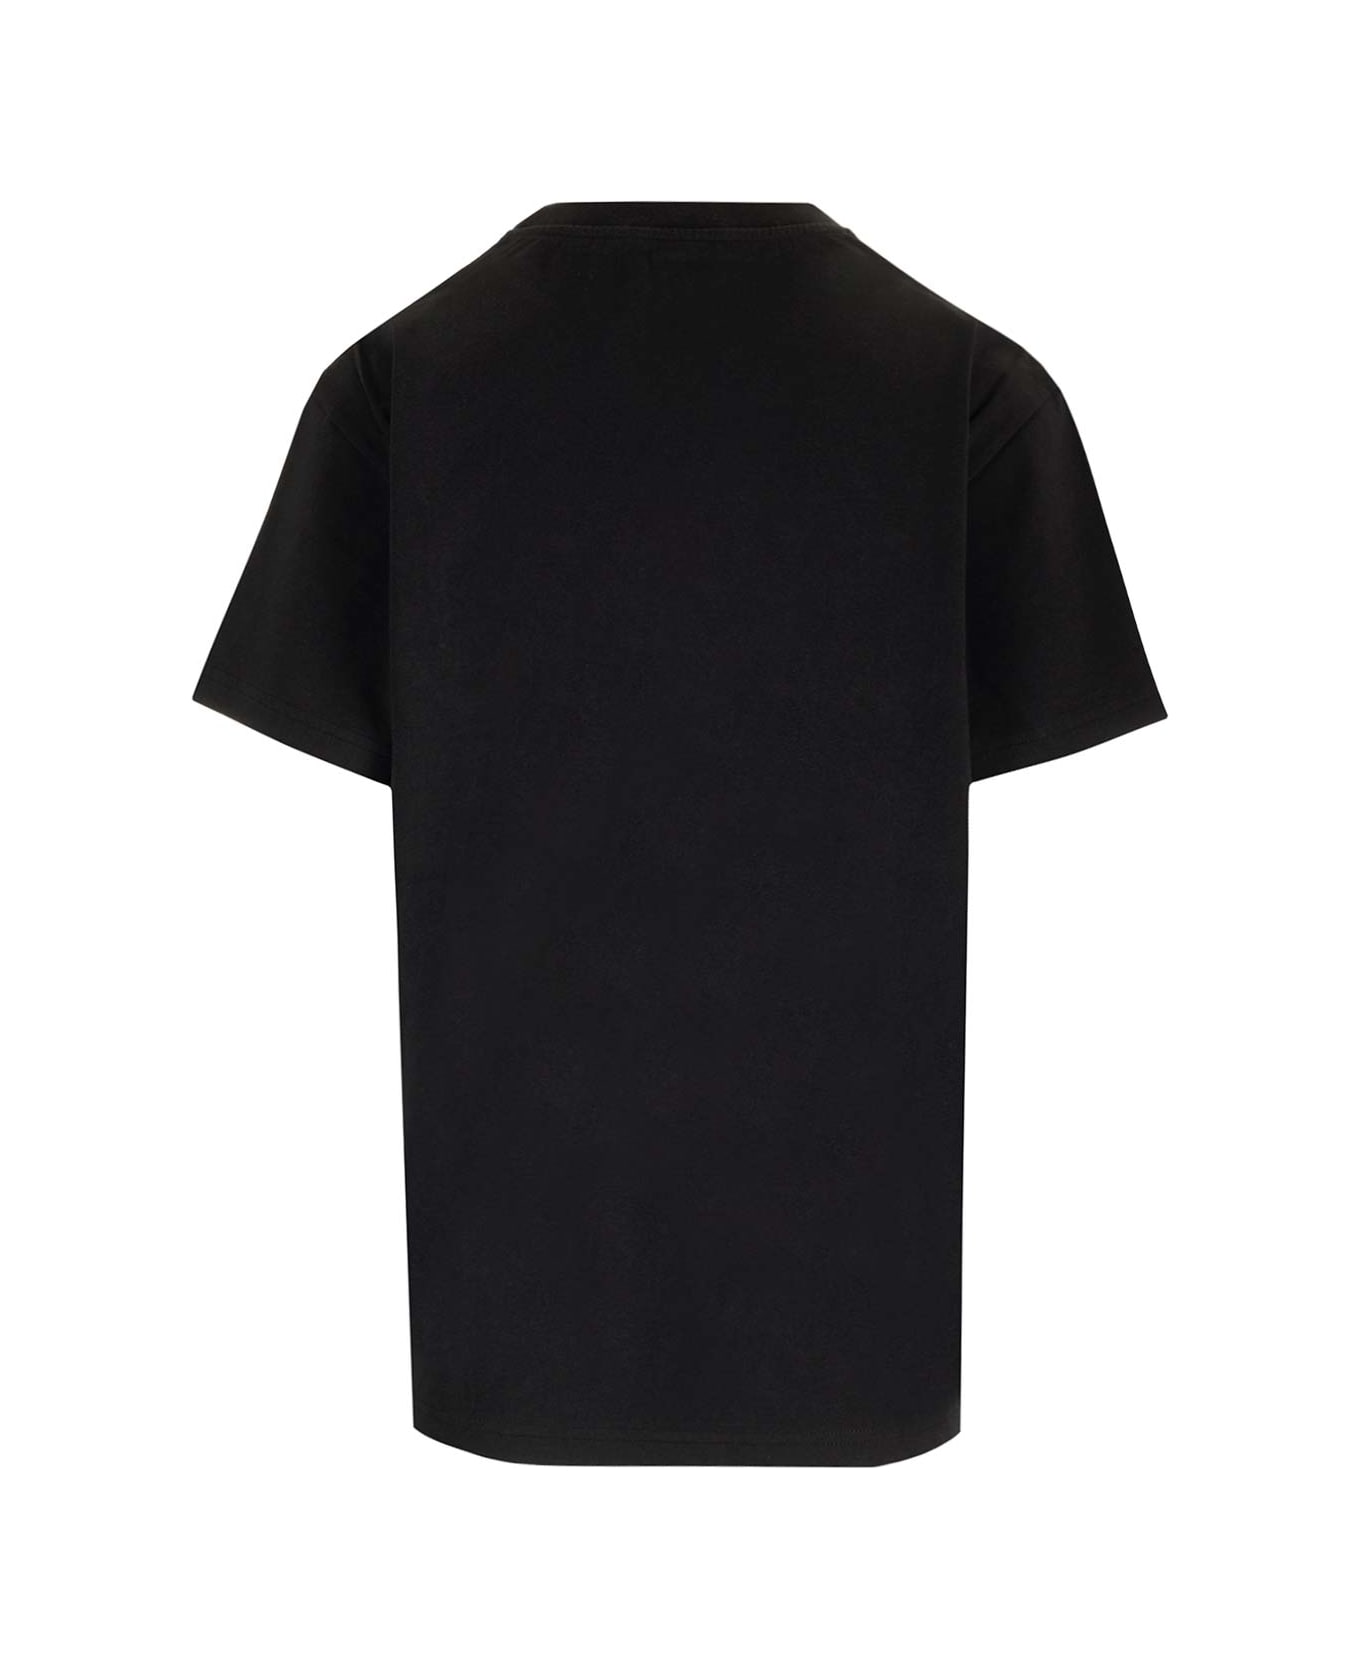 Chloé Black T-shirt With Embroidered Logo - Black